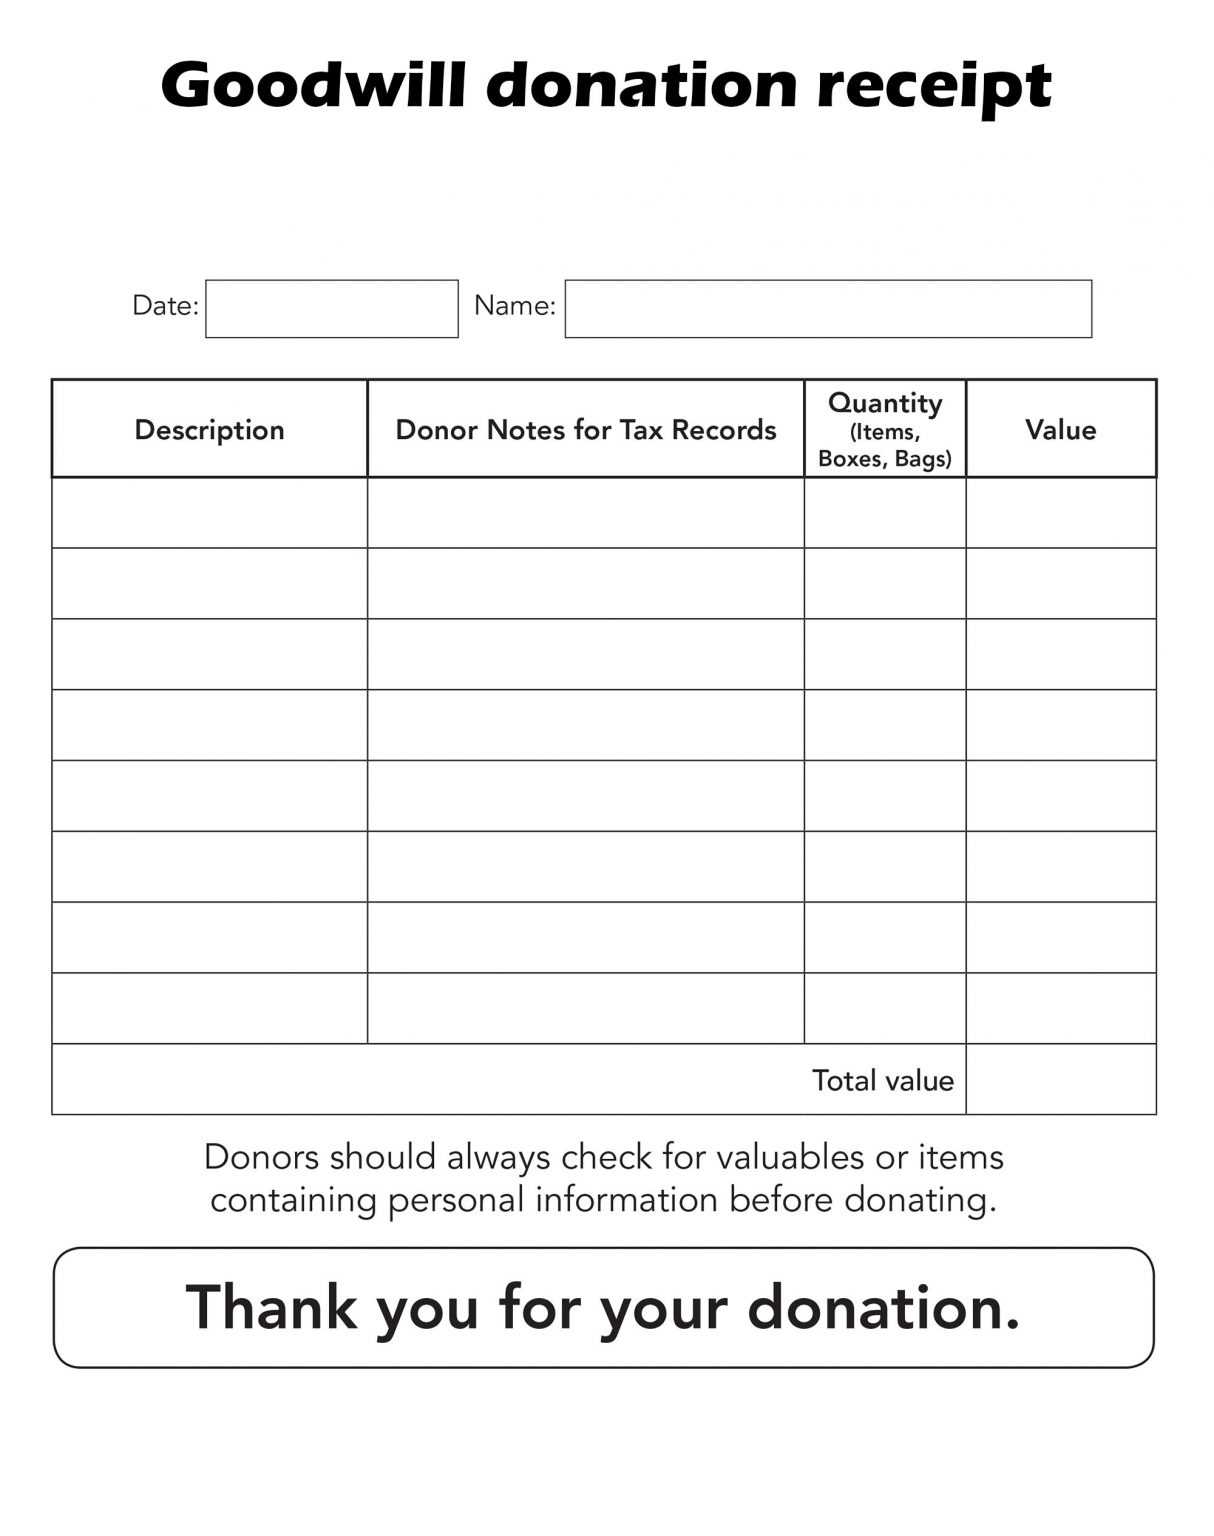 printable-goodwill-donation-form-printable-forms-free-online